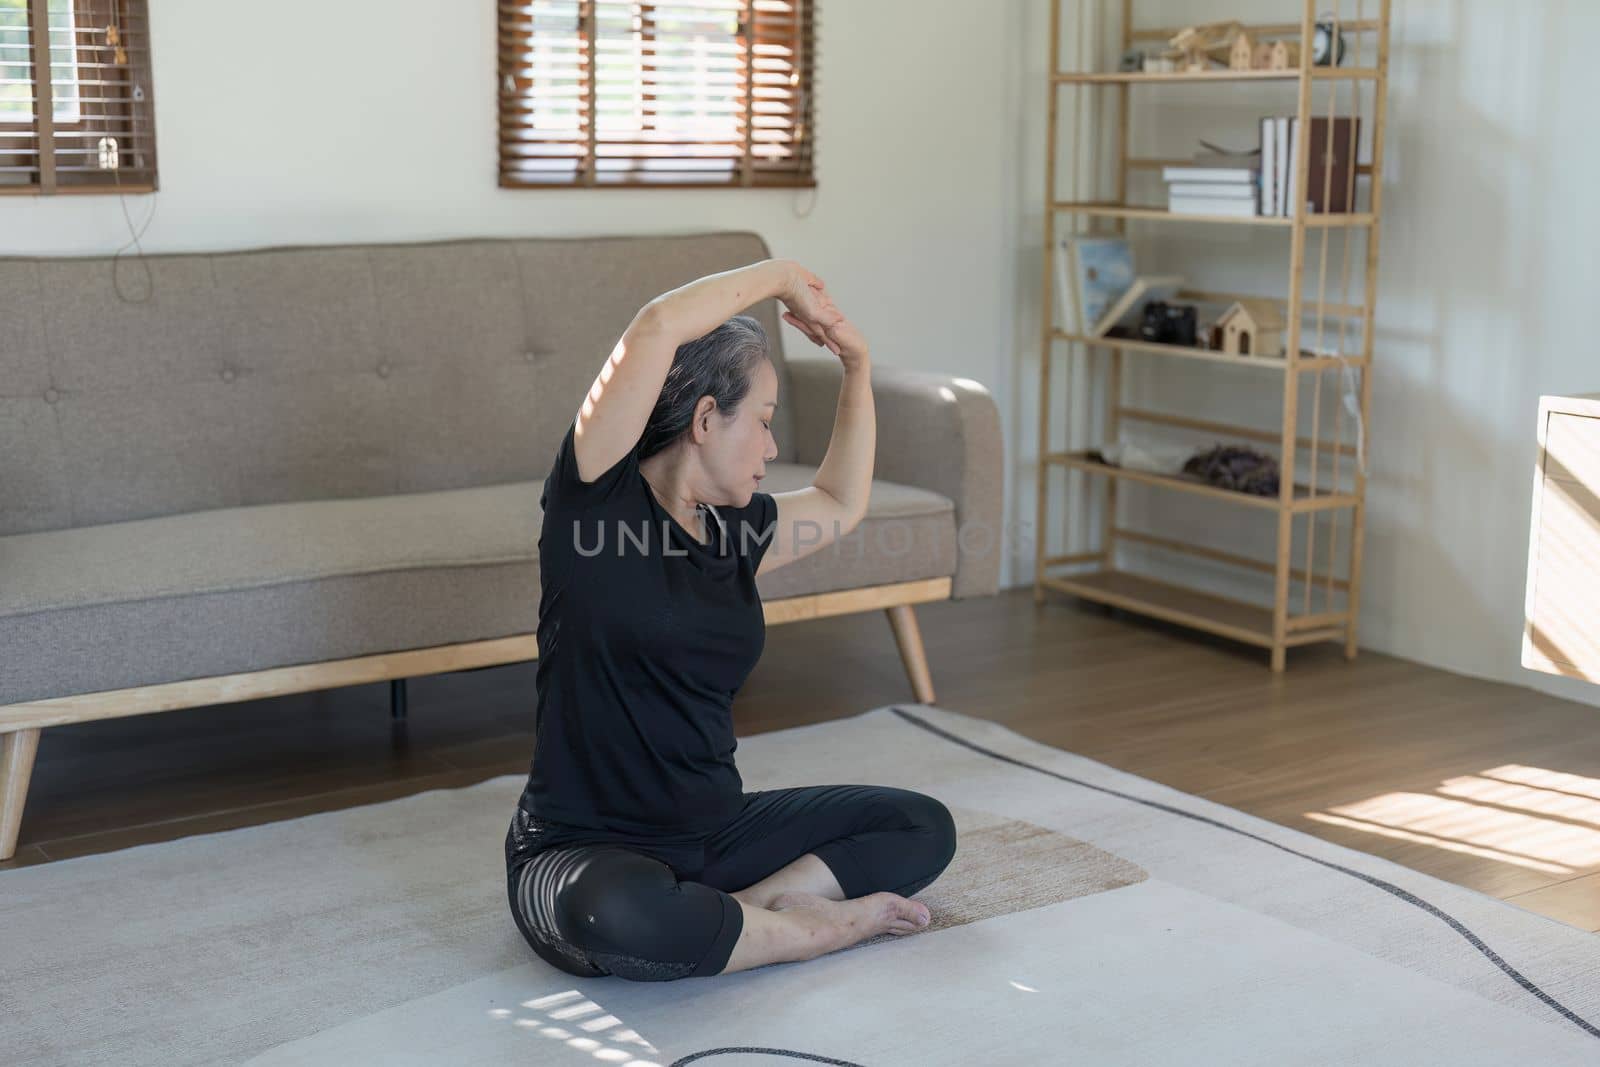 Portrait of Mature Woman doing stretching yoga side bend. exercise and stretching concept.